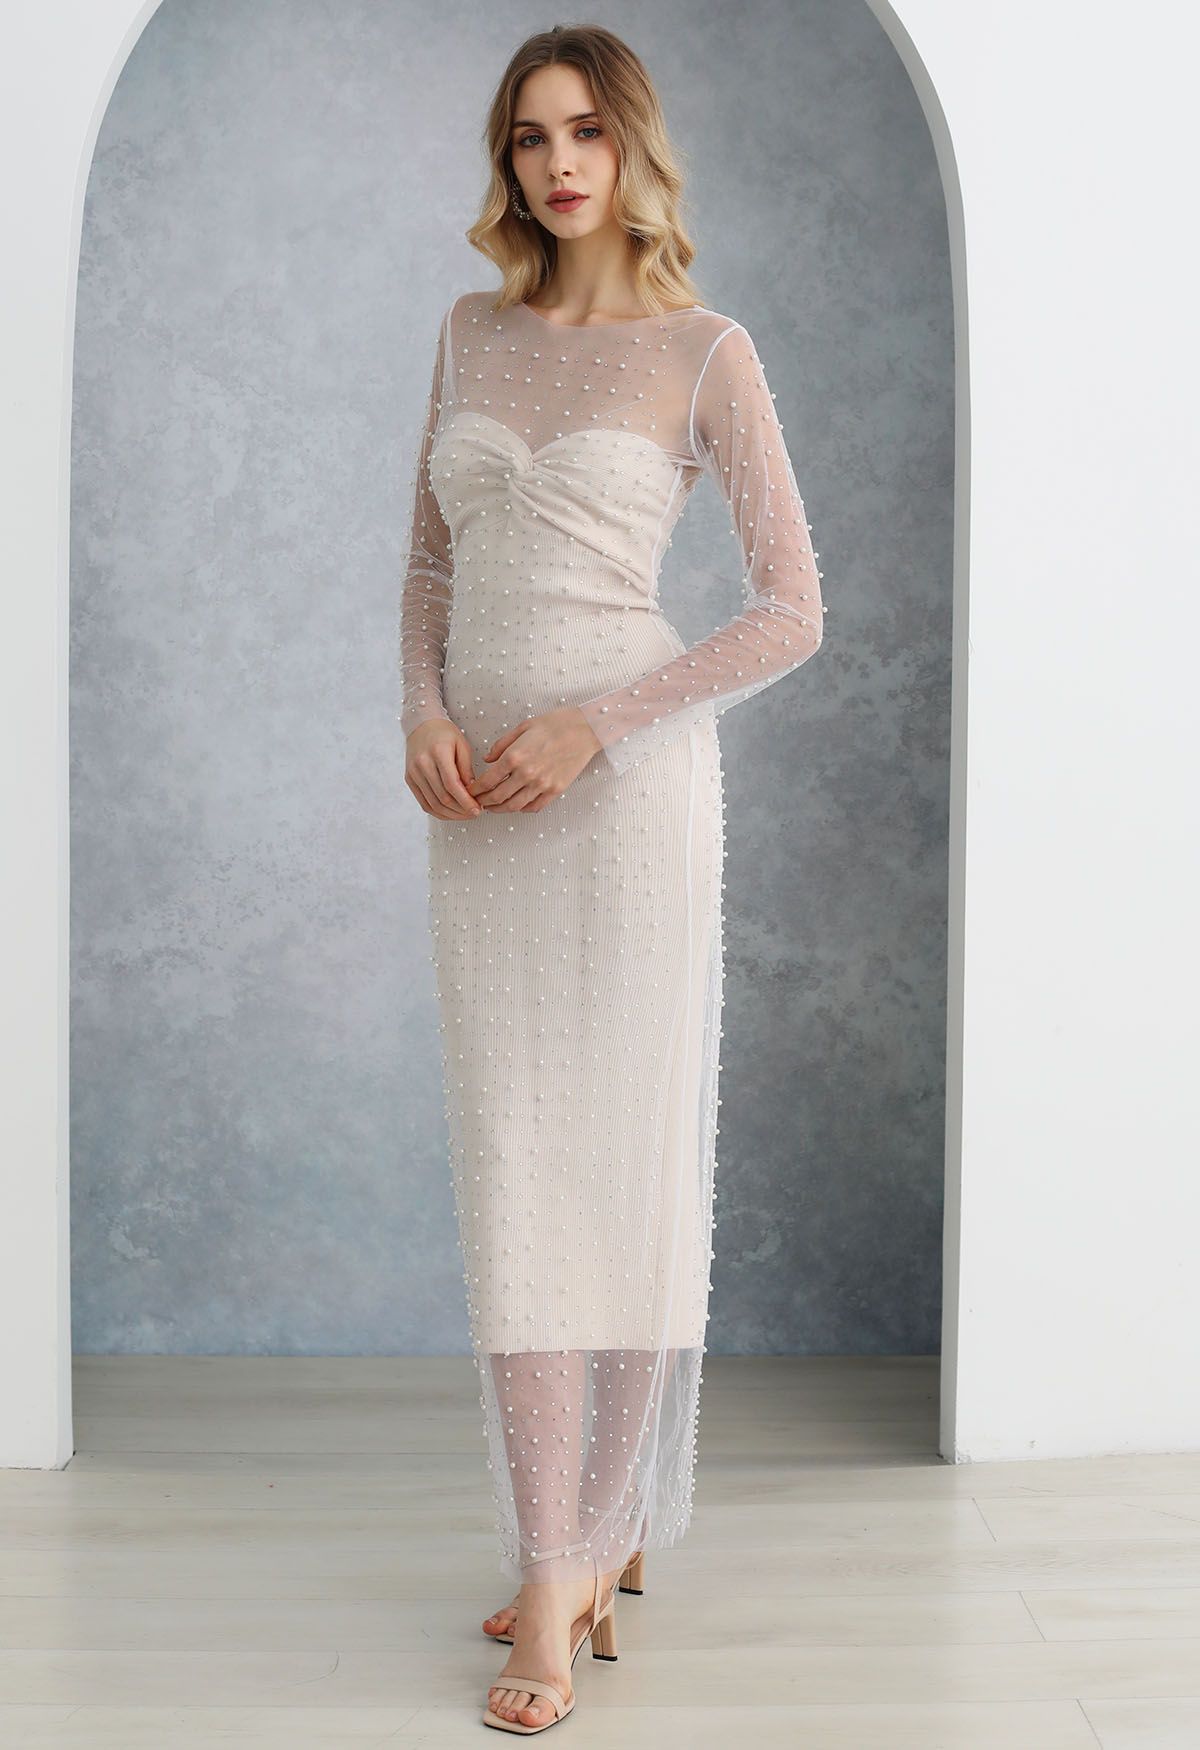 Knotted Front Fitted Knit Dress in Ivory